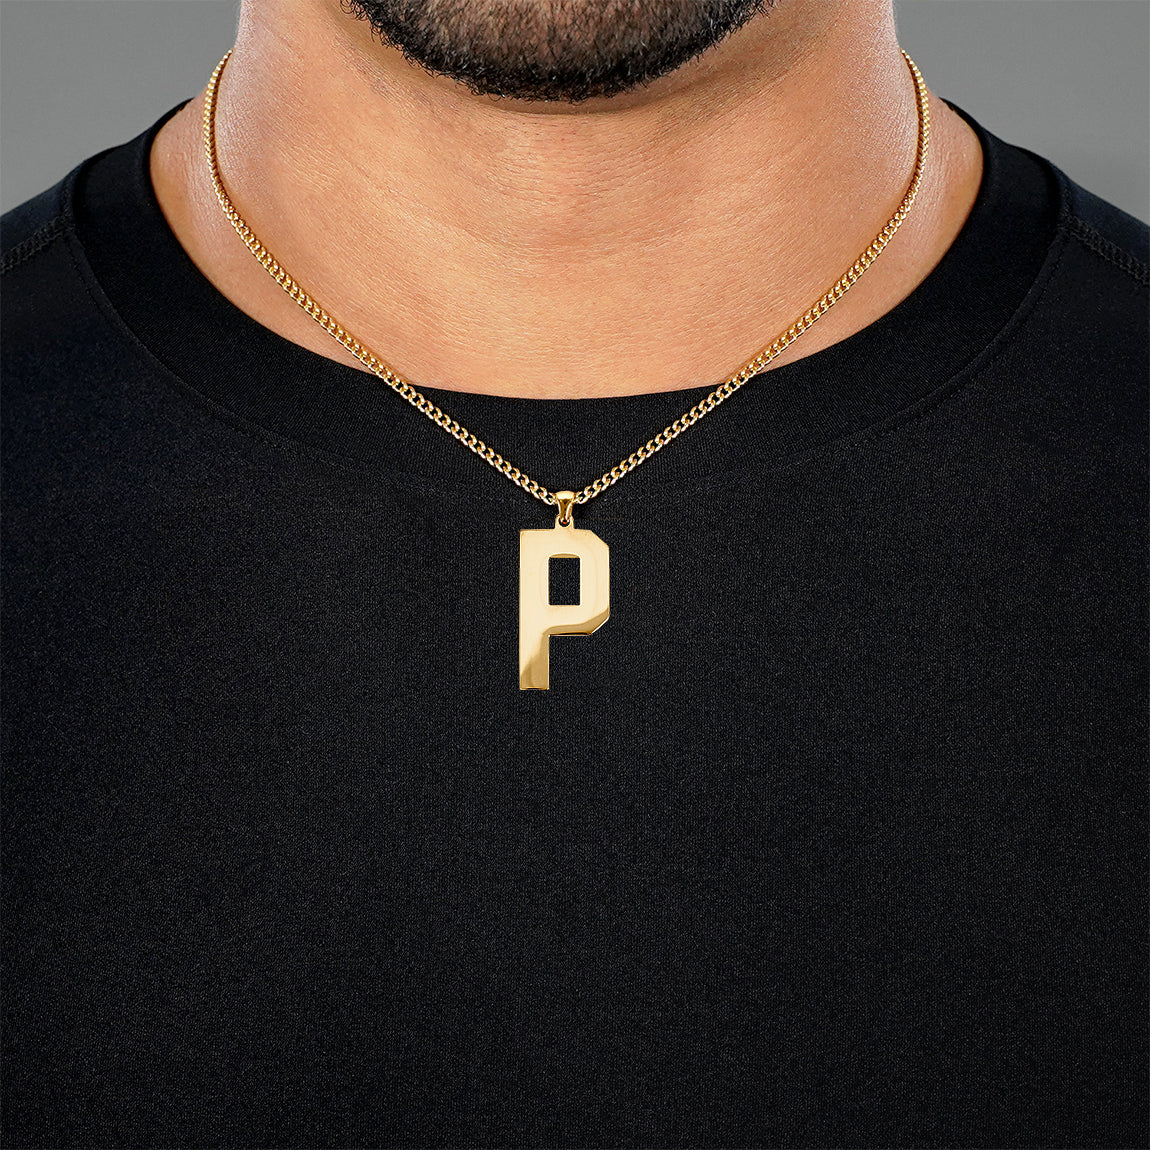 P Letter Pendant with Chain Necklace - Gold Plated Stainless Steel